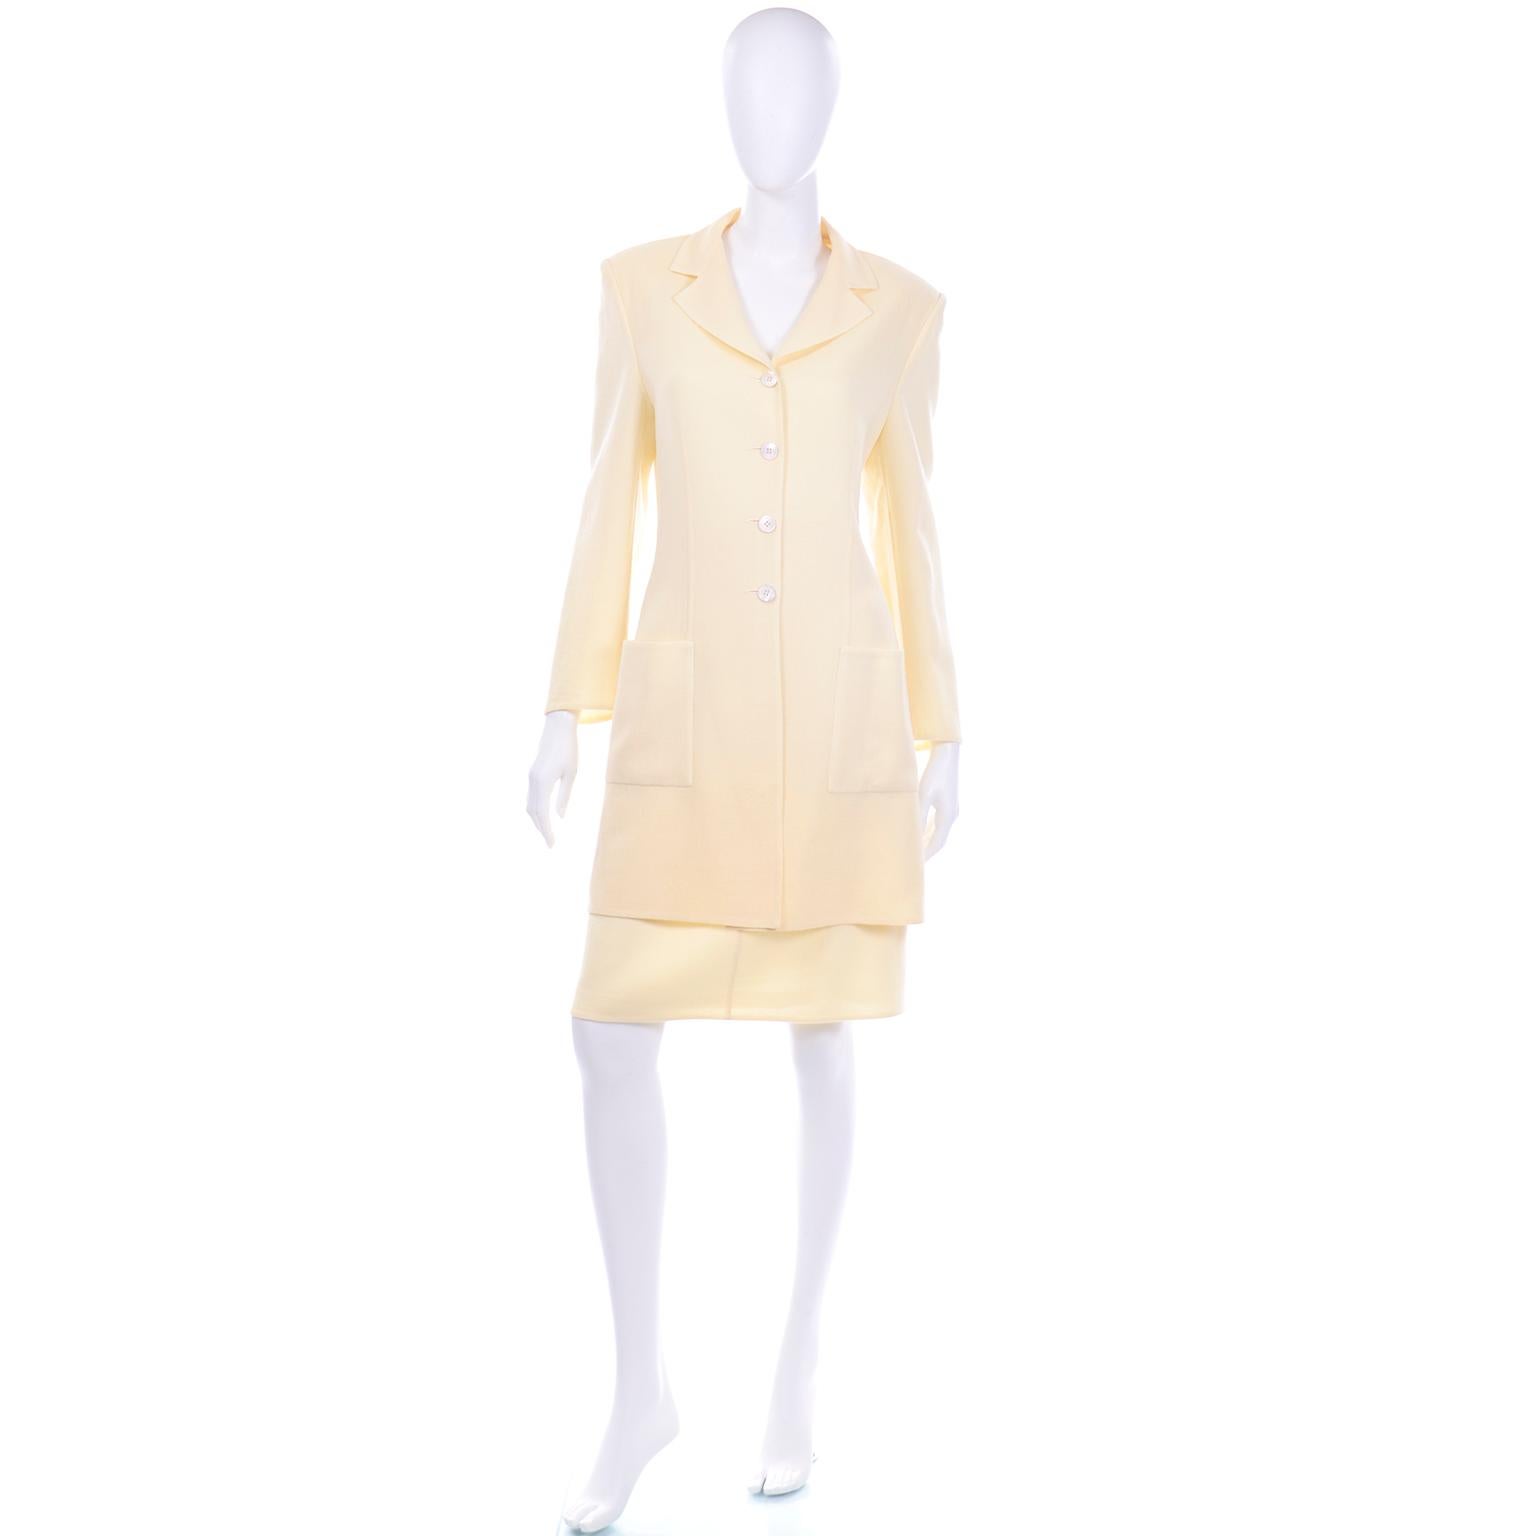 This is a beautiful shimmer pale yellow crepe skirt suit from Salvatore Ferragamo. The fabric is very unique, because it has a clear thin tinsel-like-thread woven through the crepe fabric. The color is a stunning muted pale yellow that is excellent